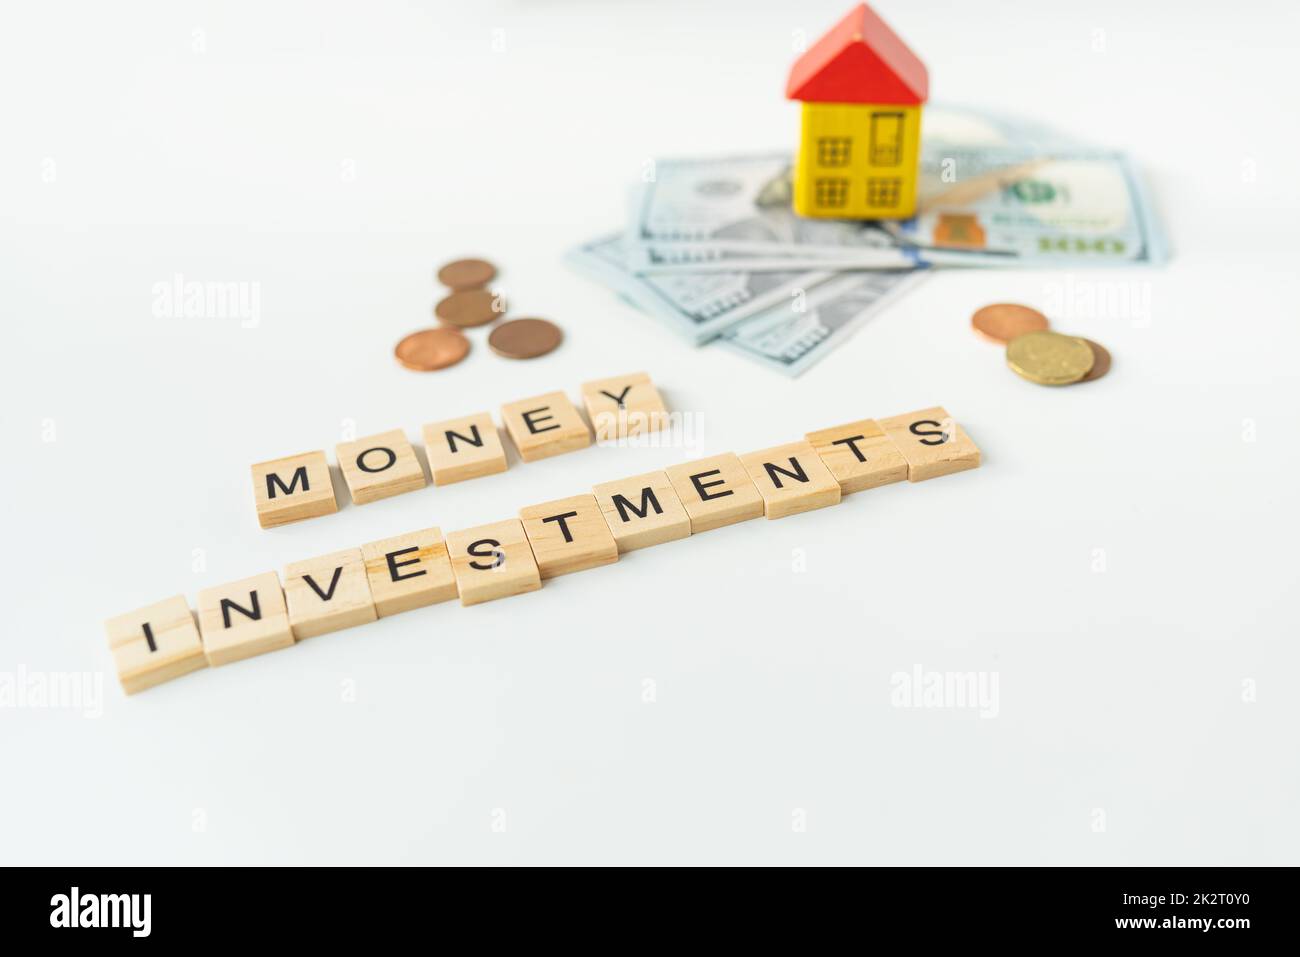 International currency money including euro, dollar, coin, dollar bill. The inscription in wooden letters money investments. The concept of mortgages, investments, loans, debts. Stock Photo